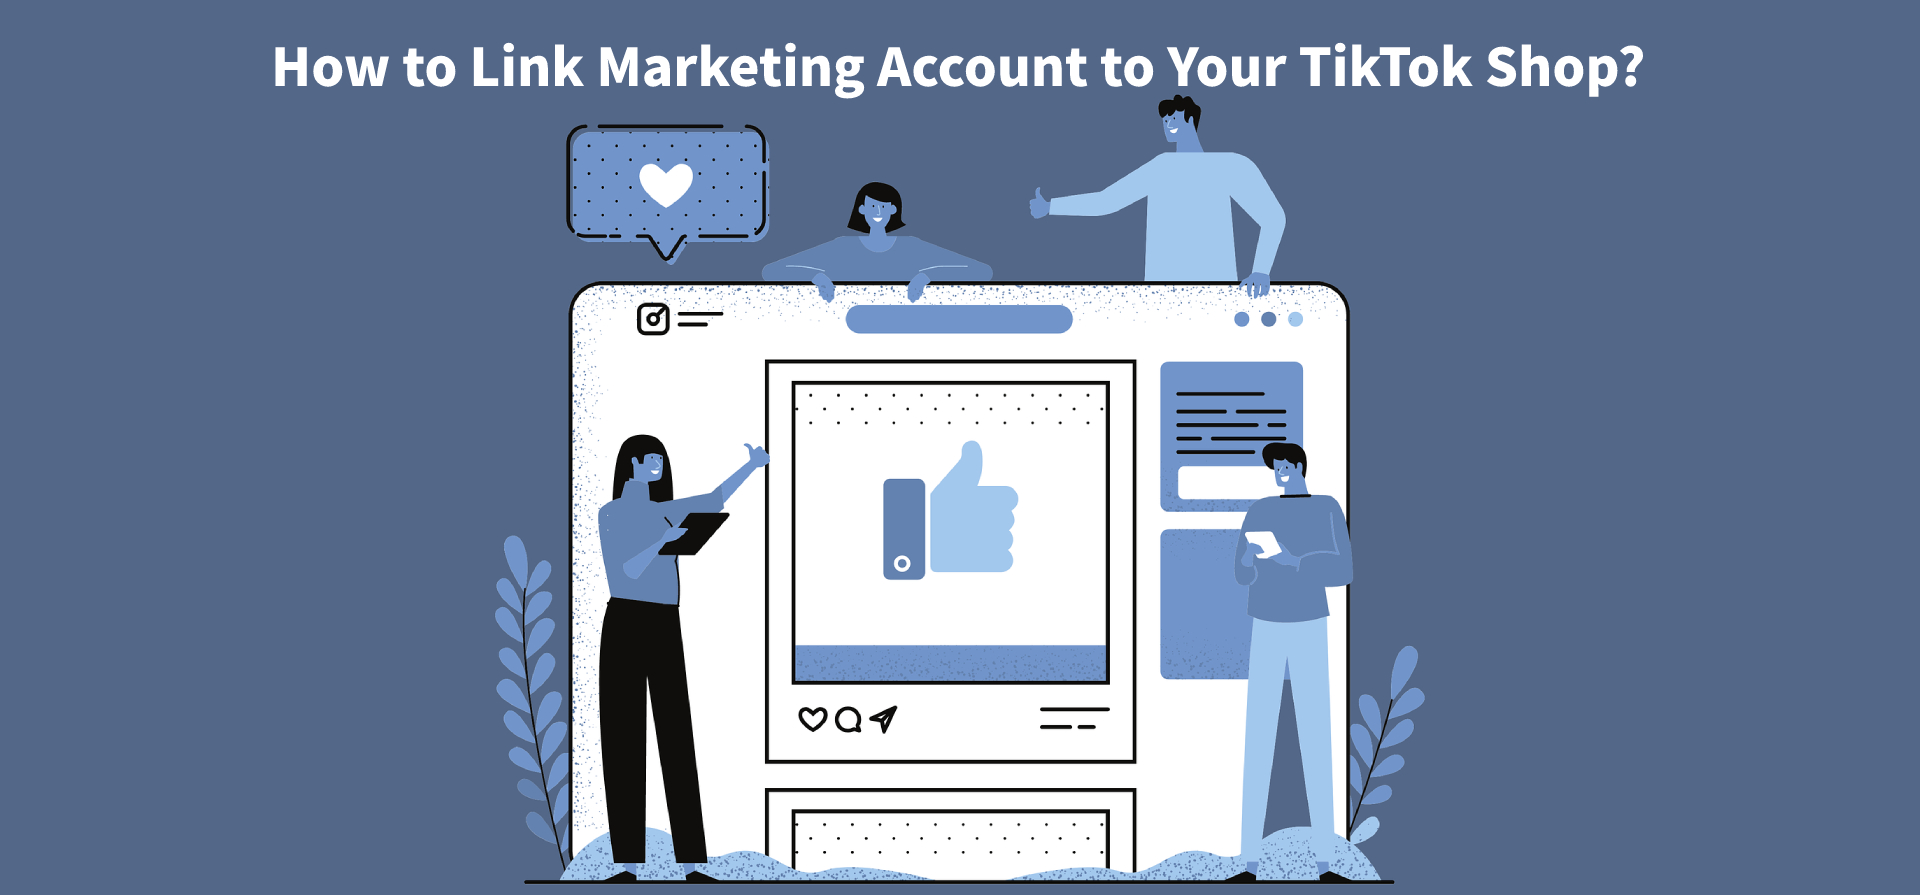 How to Link Marketing Account to Your TikTok Shop?